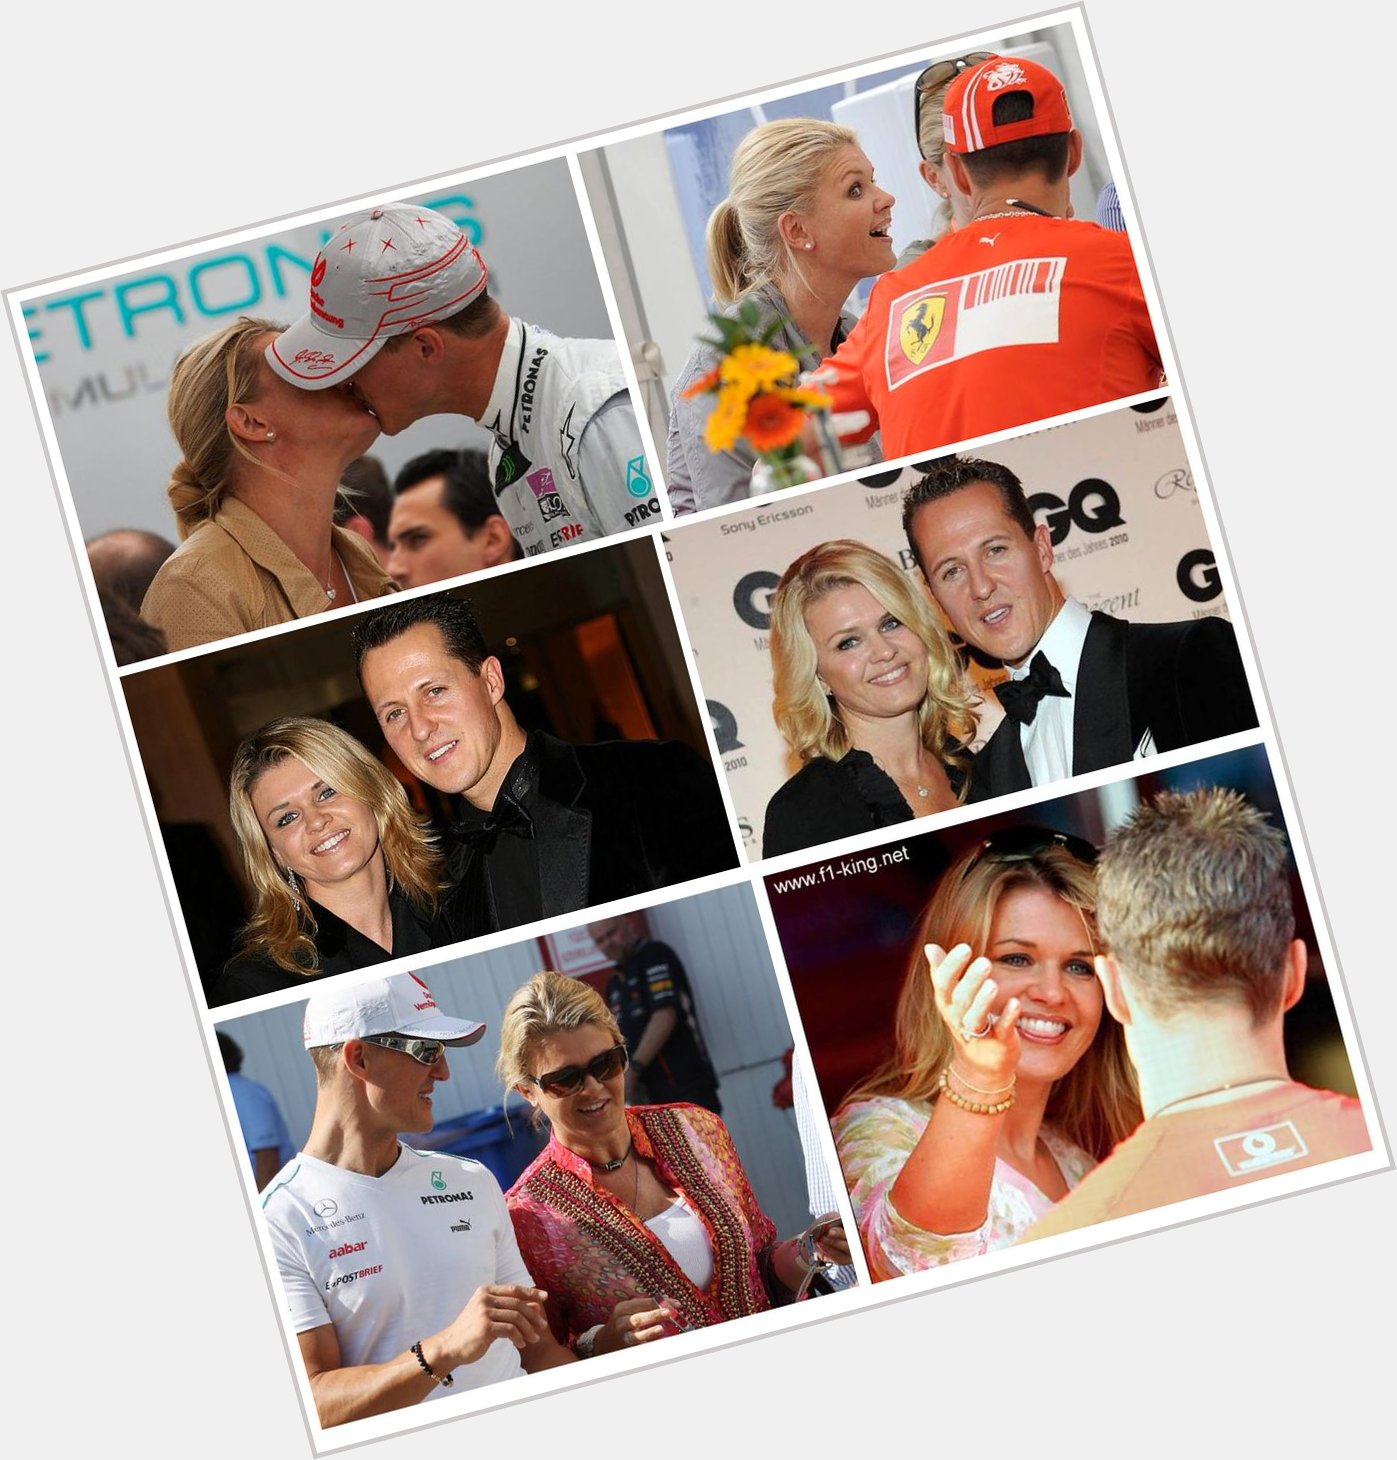 Happy birthday Corinna Schumacher! 46 today! Such a strong and brave woman! Stay strong!  